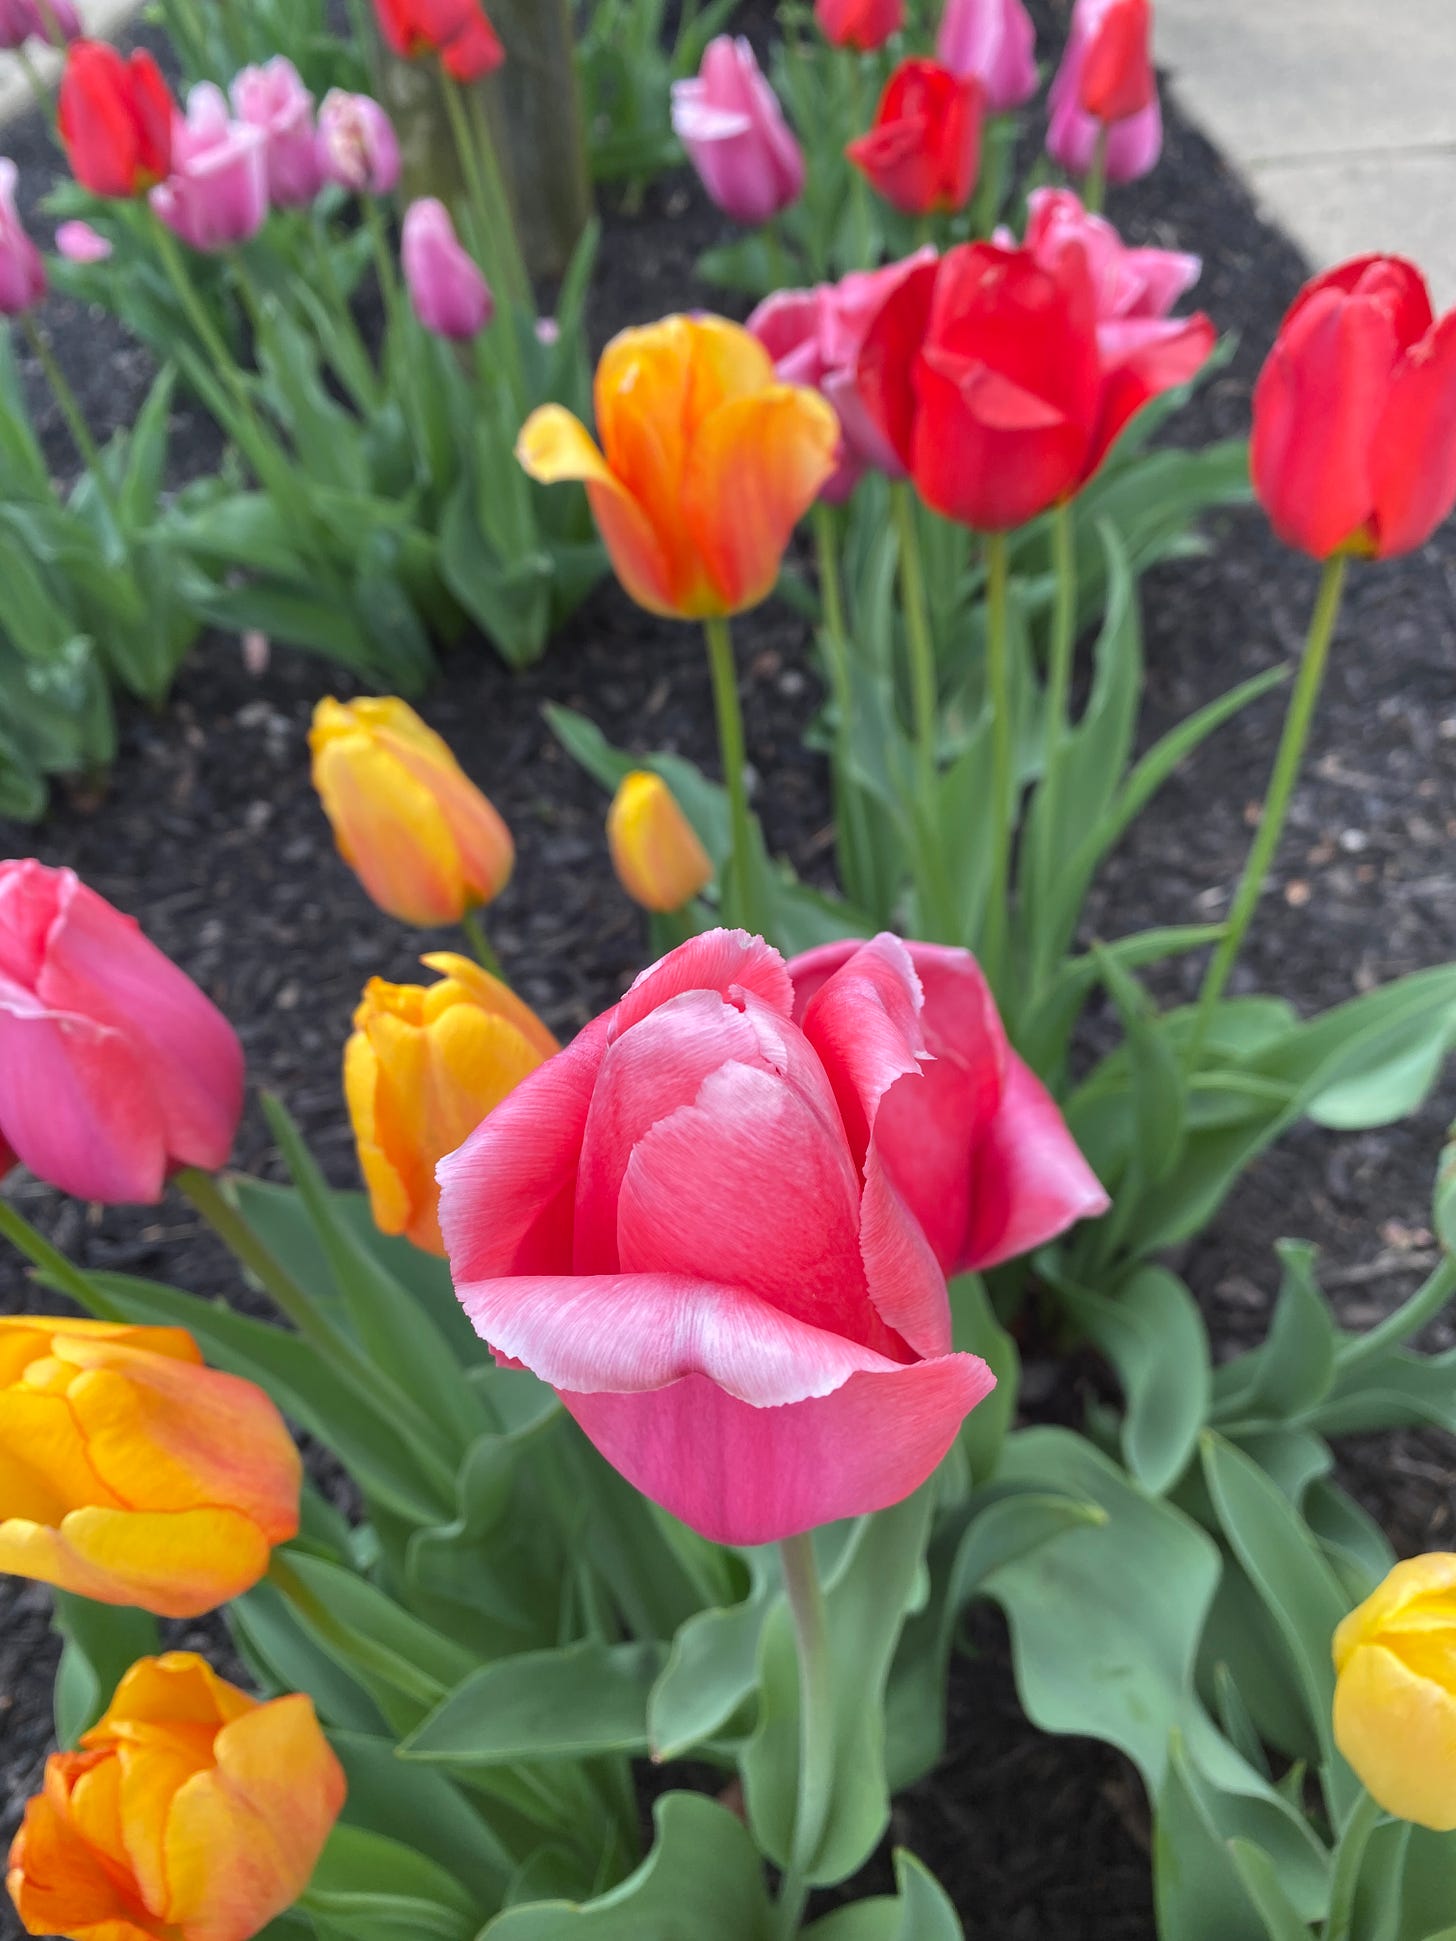 yelloy pink and red tulips